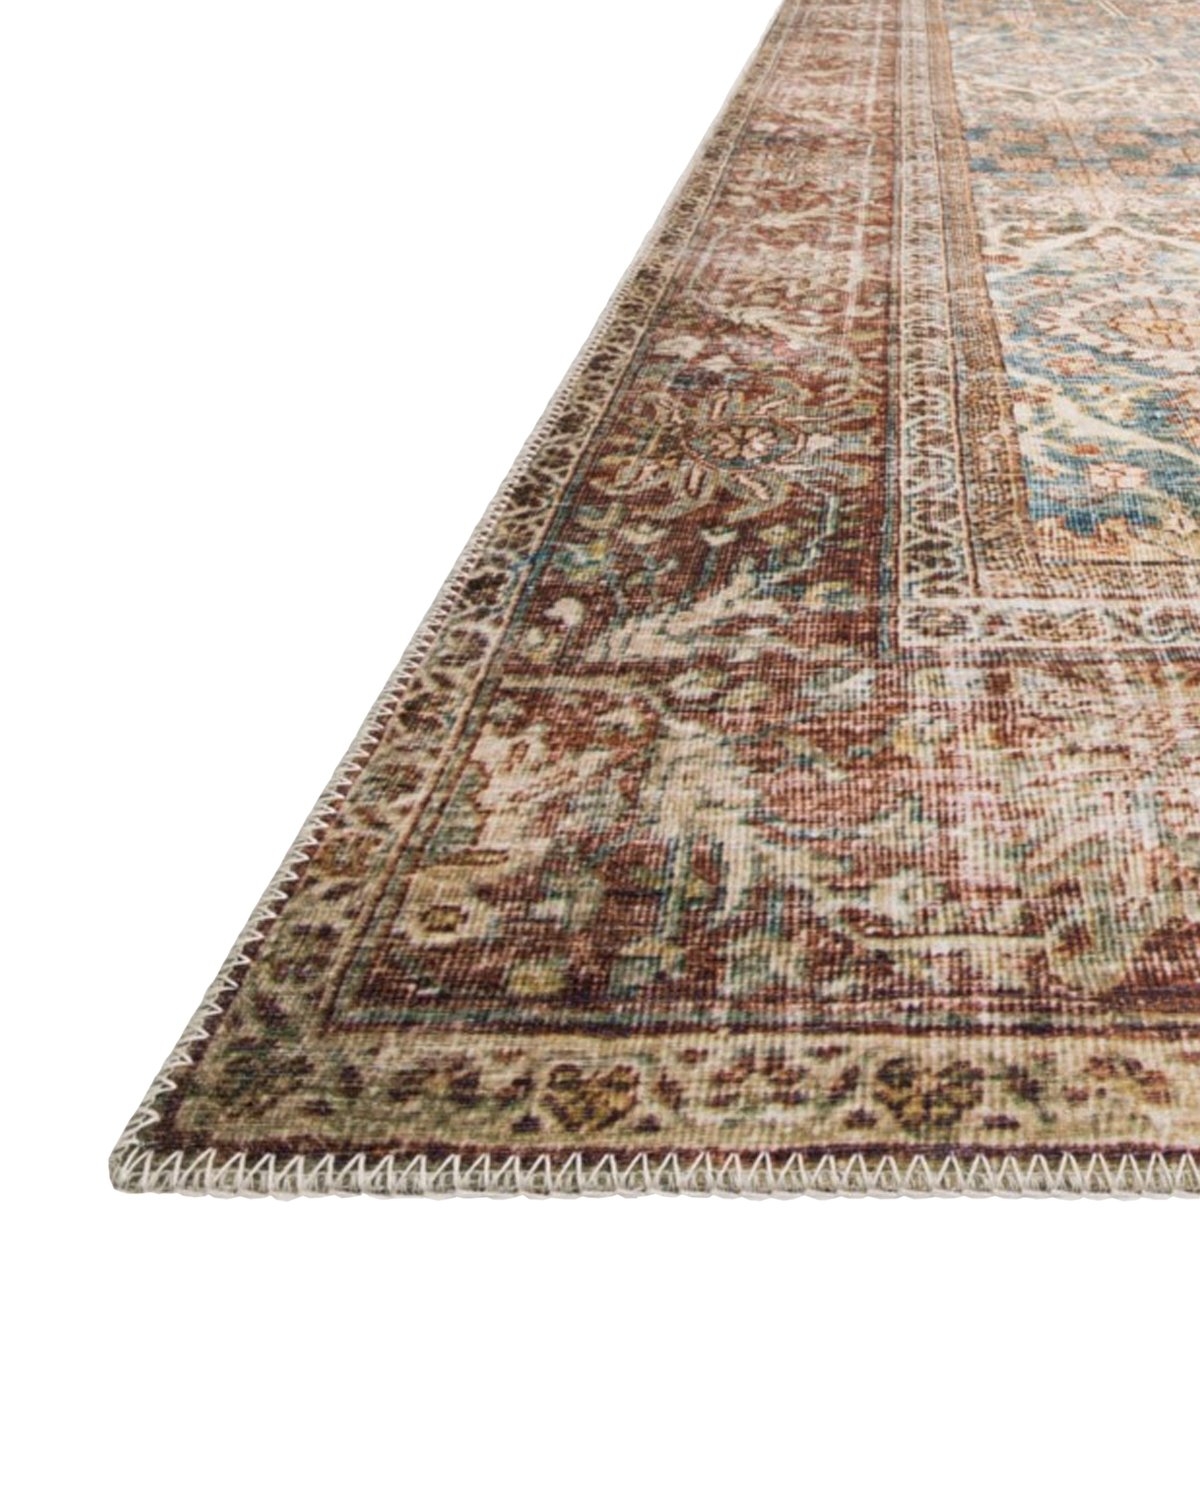 TUNIS PATTERNED RUG, 2'6" x 12' - Image 2